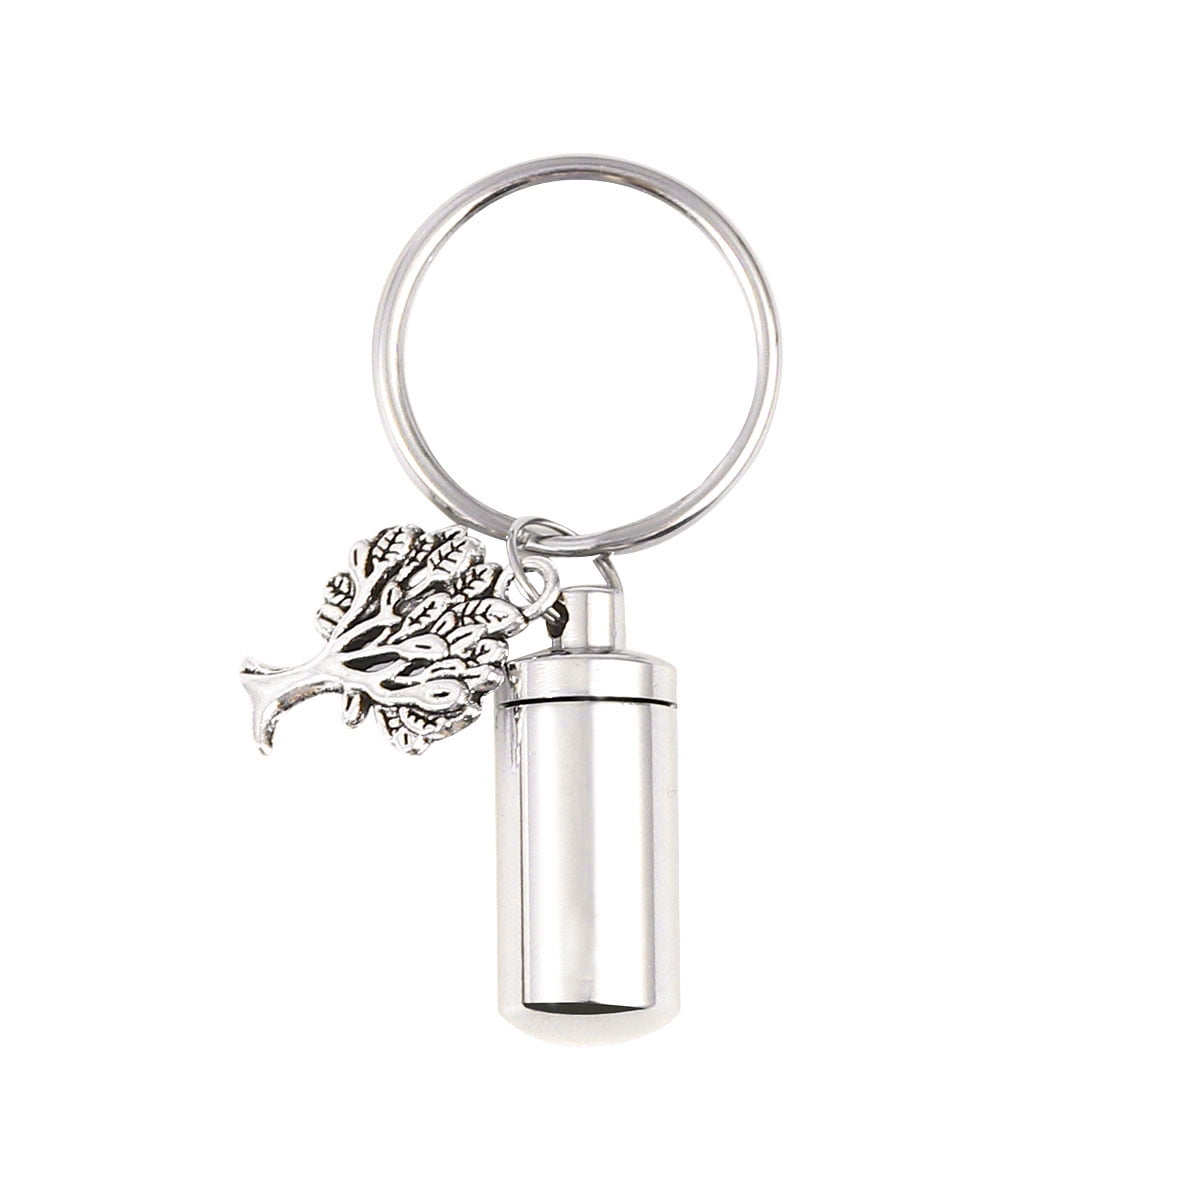 Key ring with name on rice grain cylindrical shape with real flower